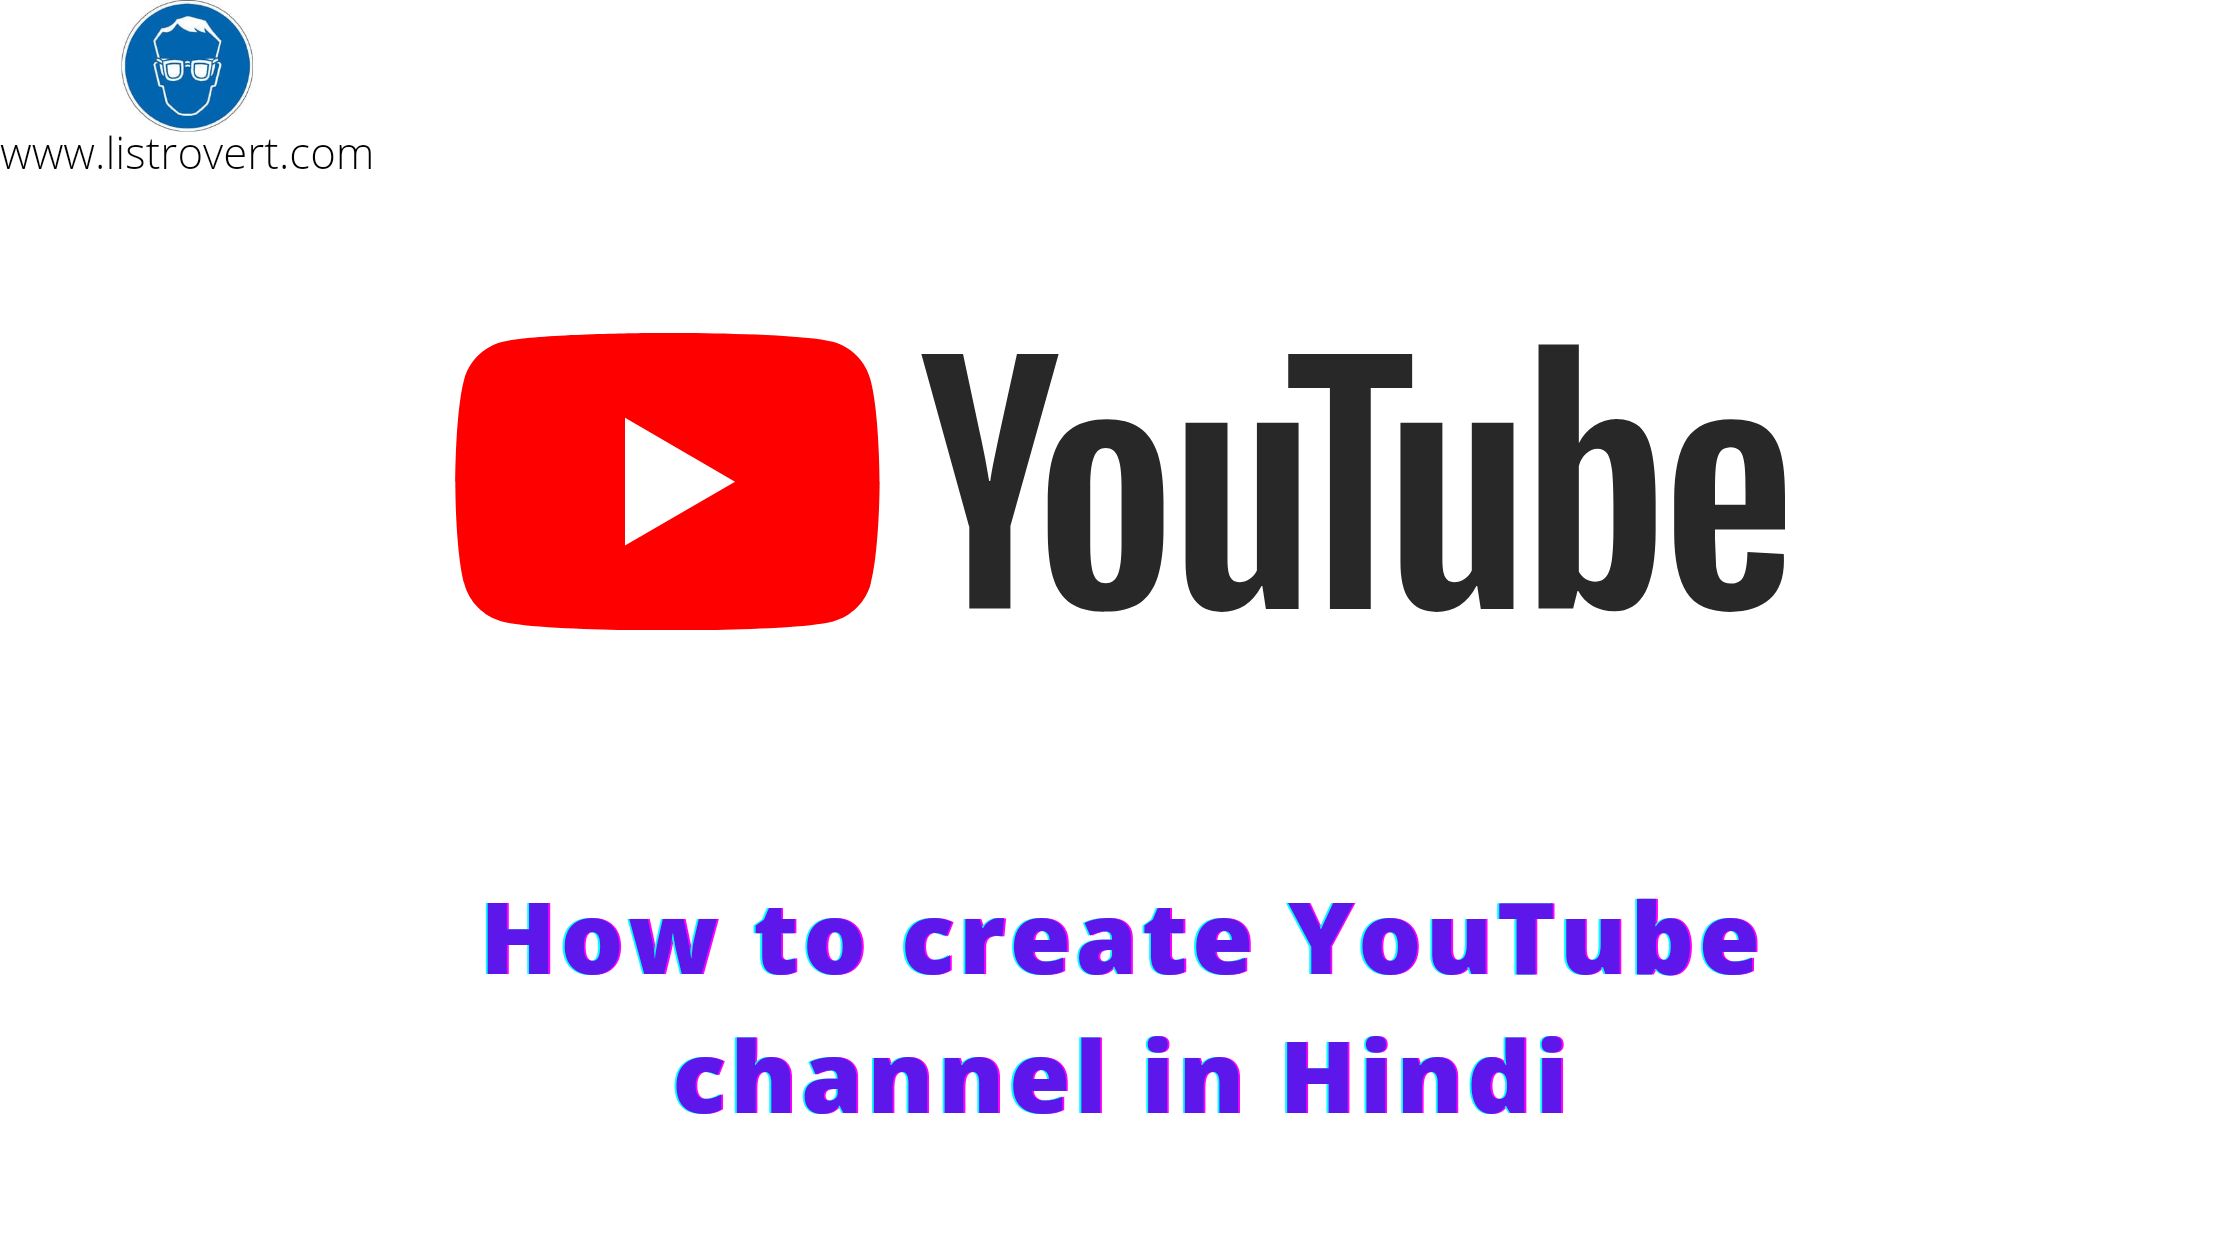 How to create youtube channel in Hindi